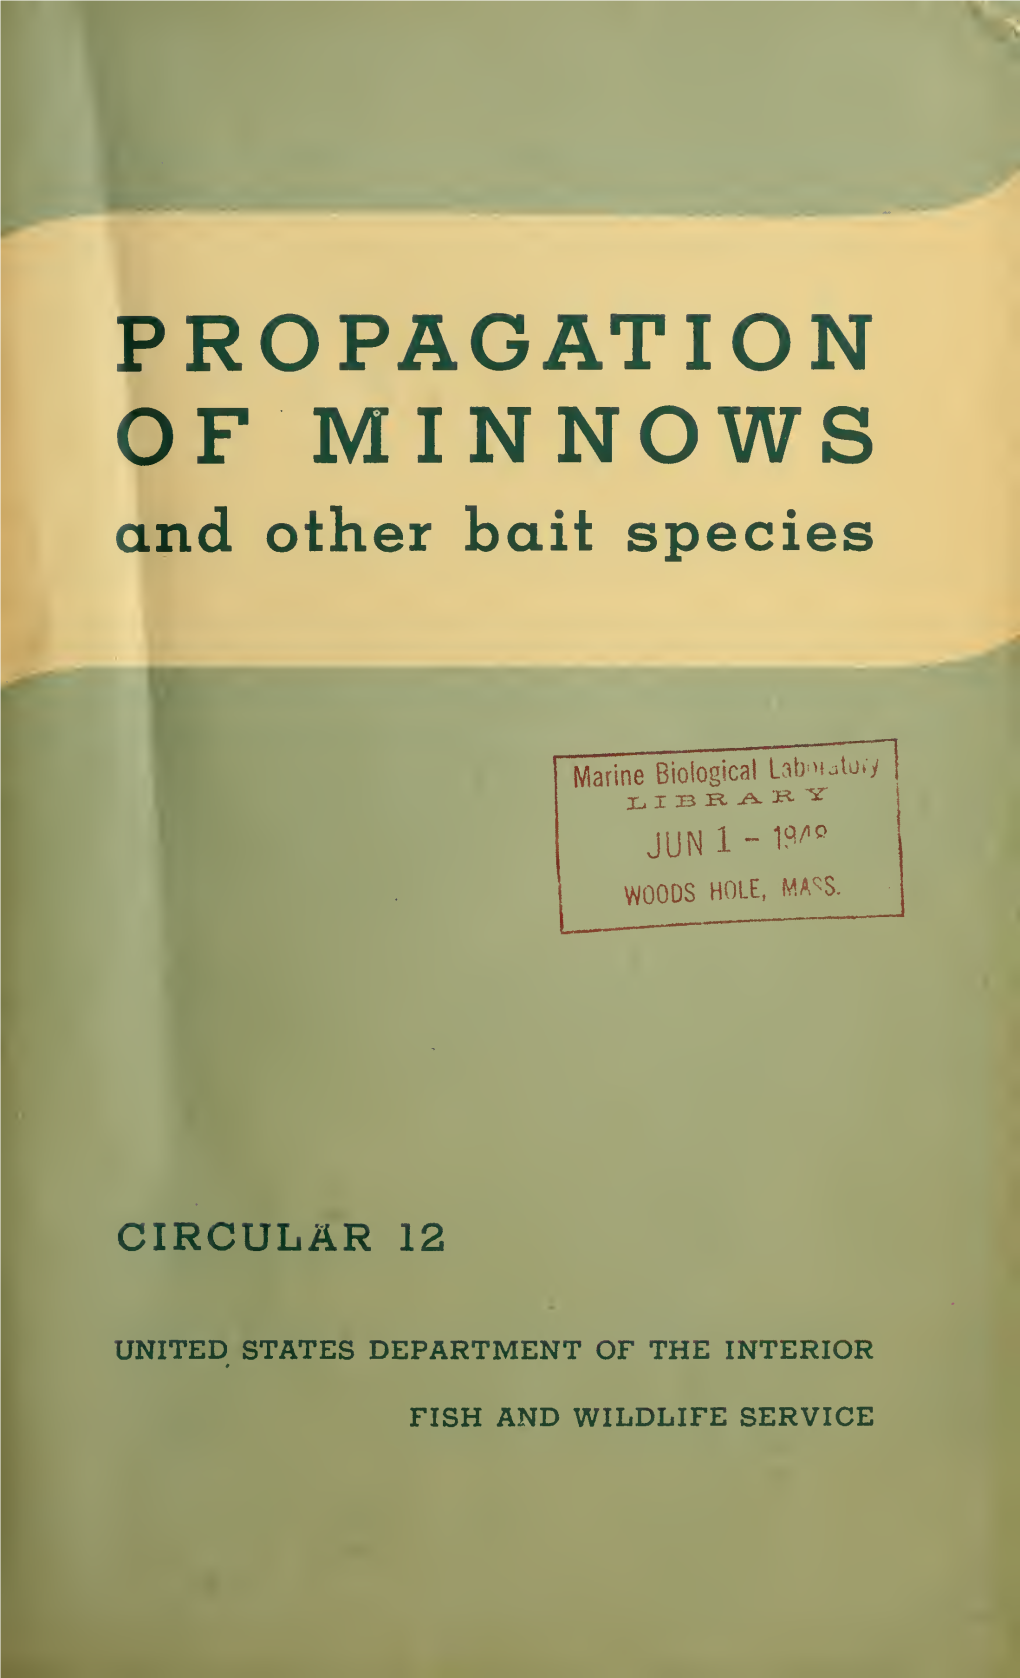 Circular 12. Propagation of Minnows and Other Bait Species